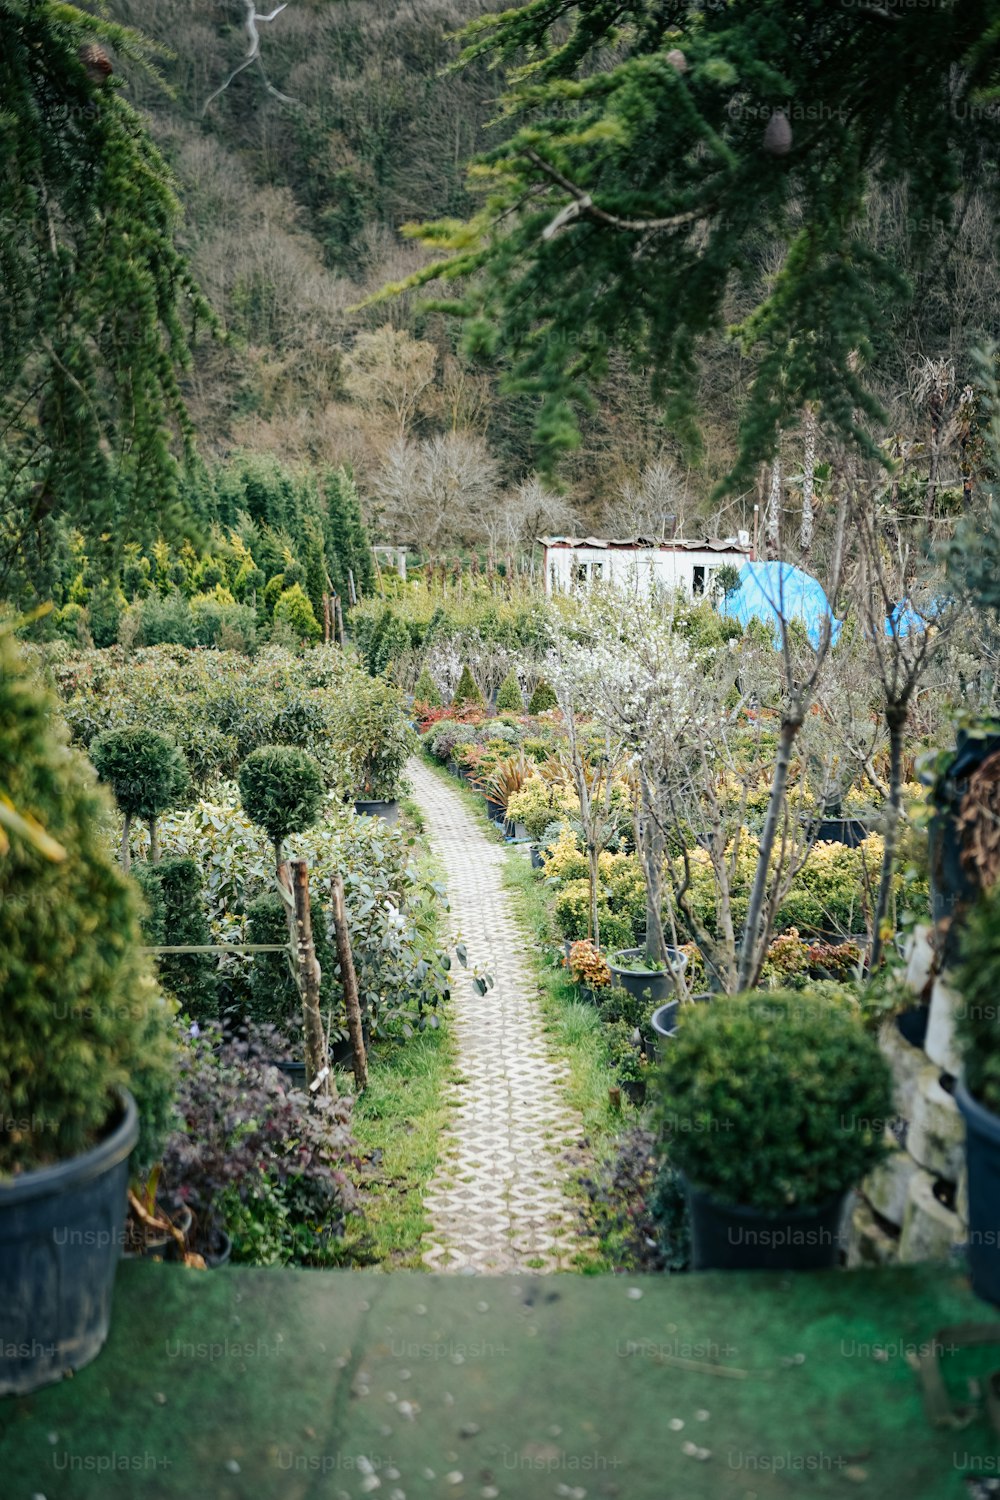 a path through a garden filled with lots of plants